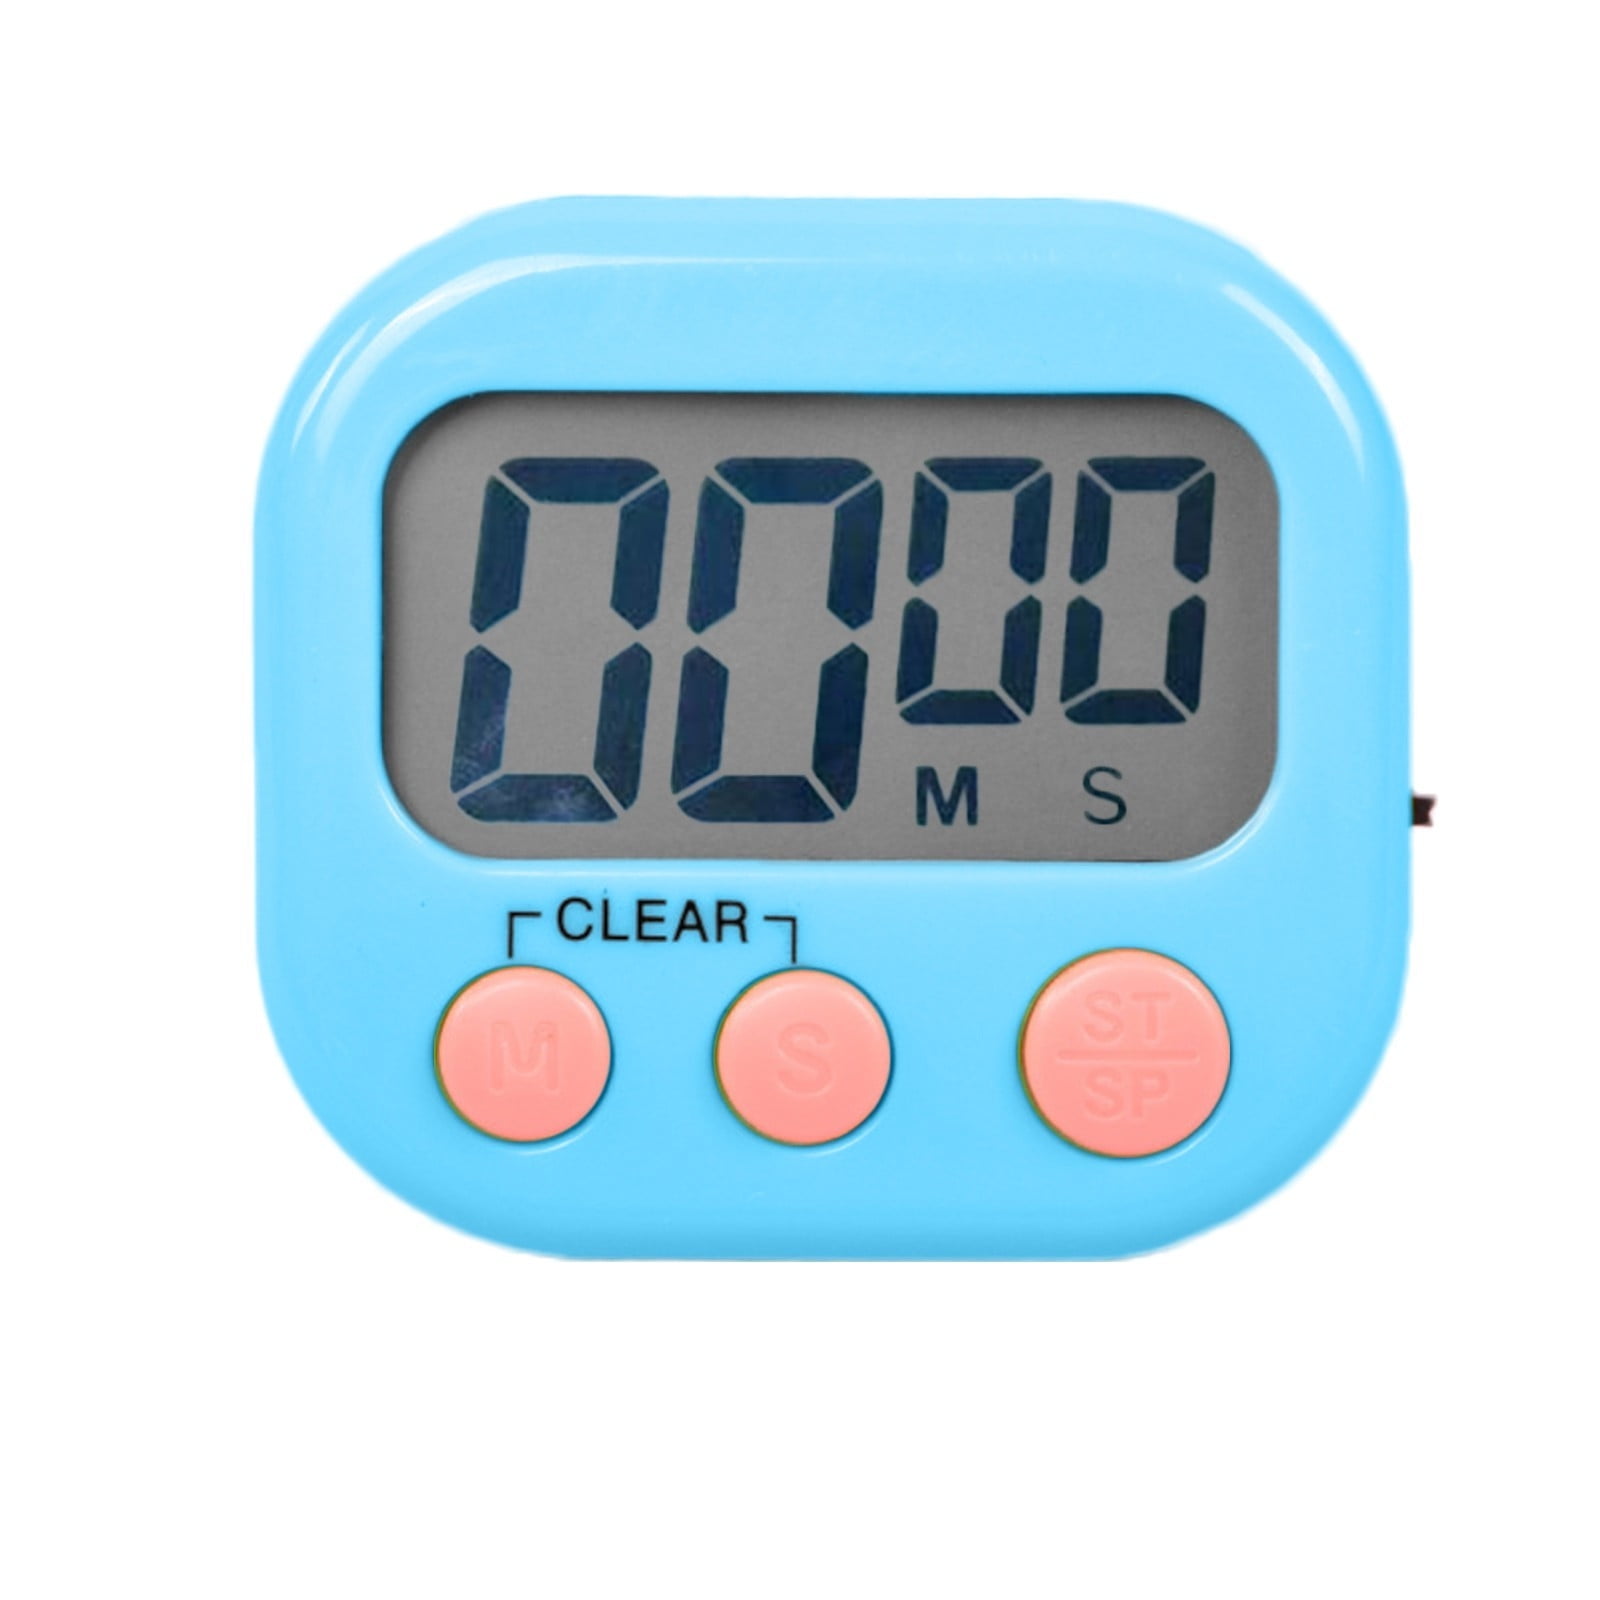 Antonki Timers, Classroom Timer for Kids, Kitchen Timer for Cooking